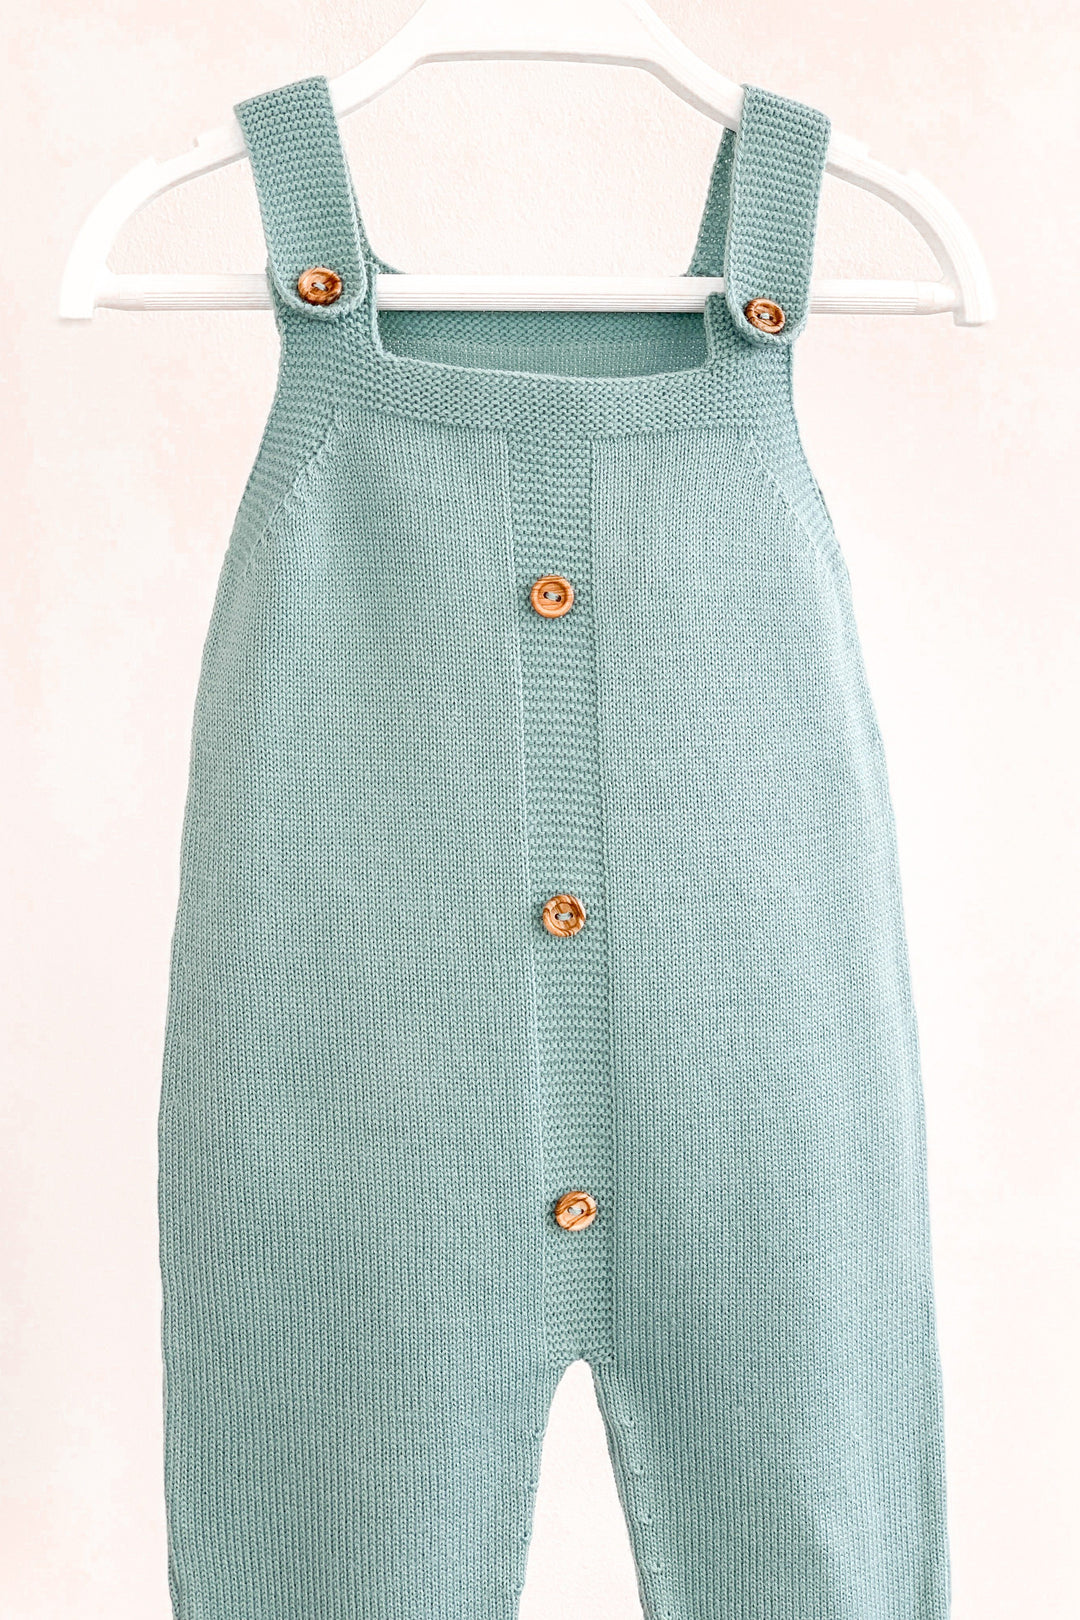 Granlei "Quinn" Sage Green Knitted Button Dungarees | Millie and John